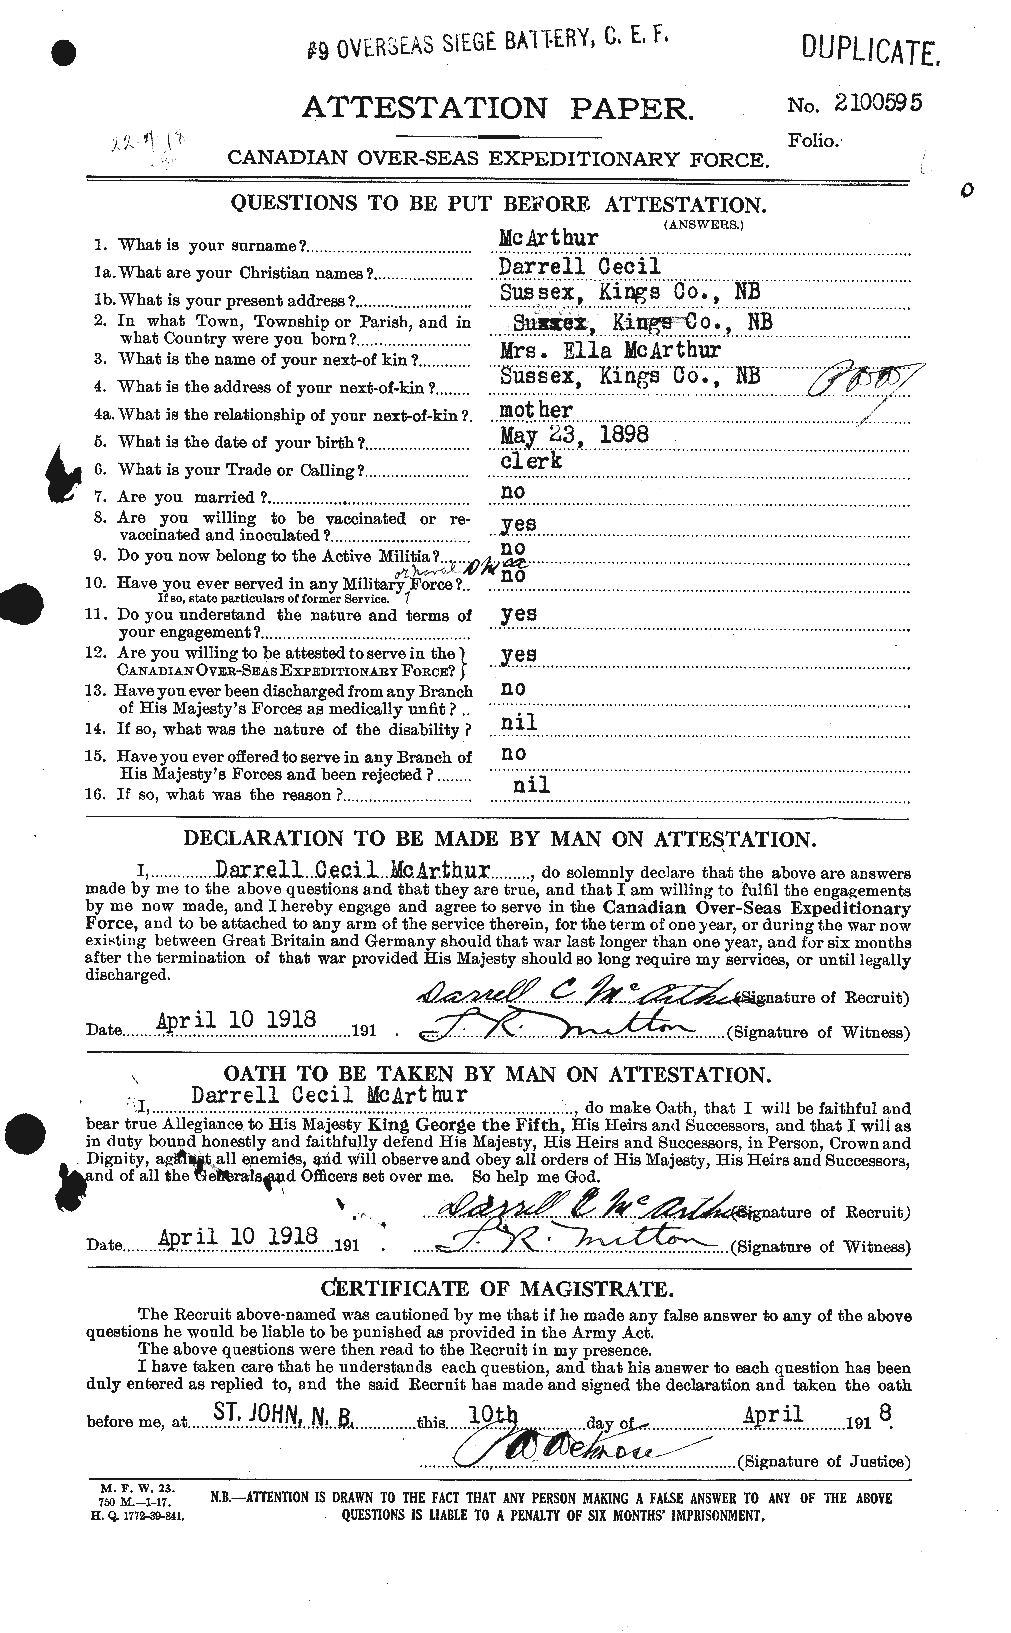 Personnel Records of the First World War - CEF 131094a